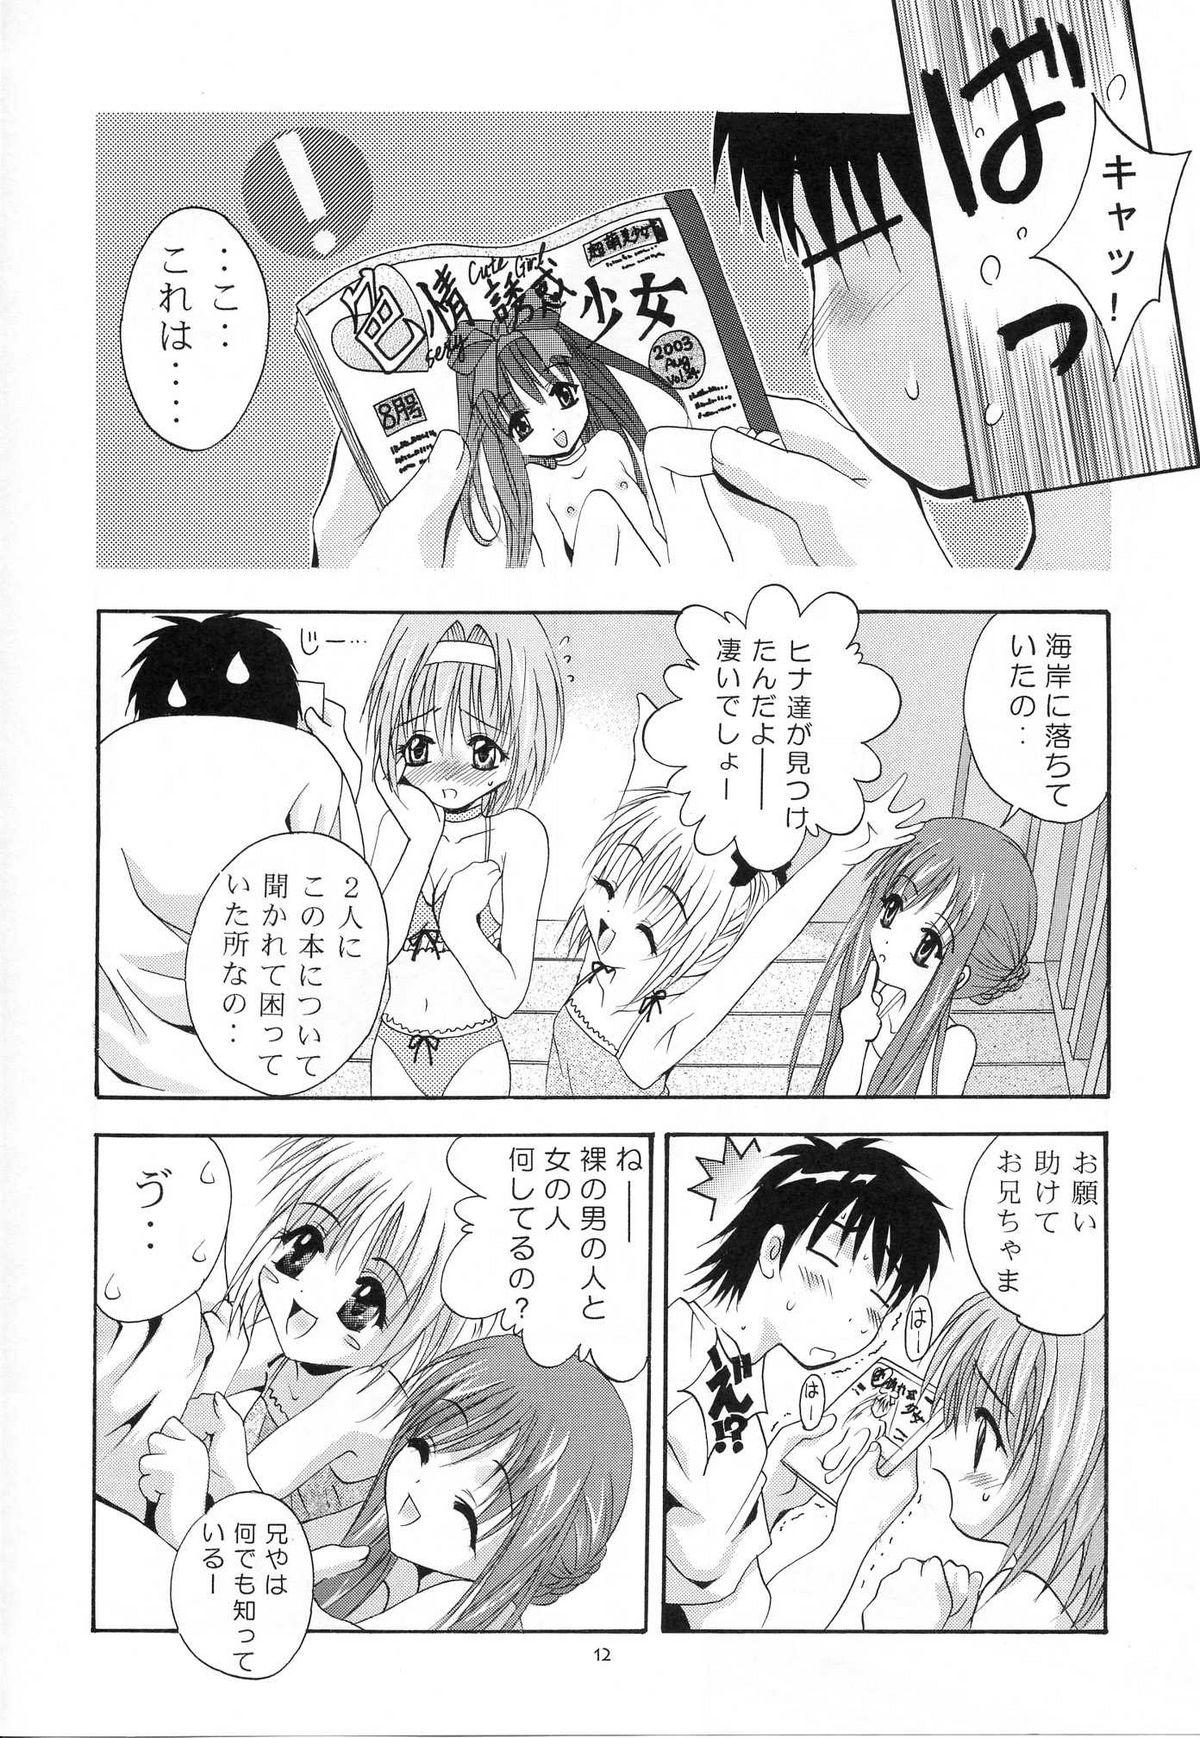 Maledom Mousou Mini Theater 11 - Sister princess Bisex - Page 11